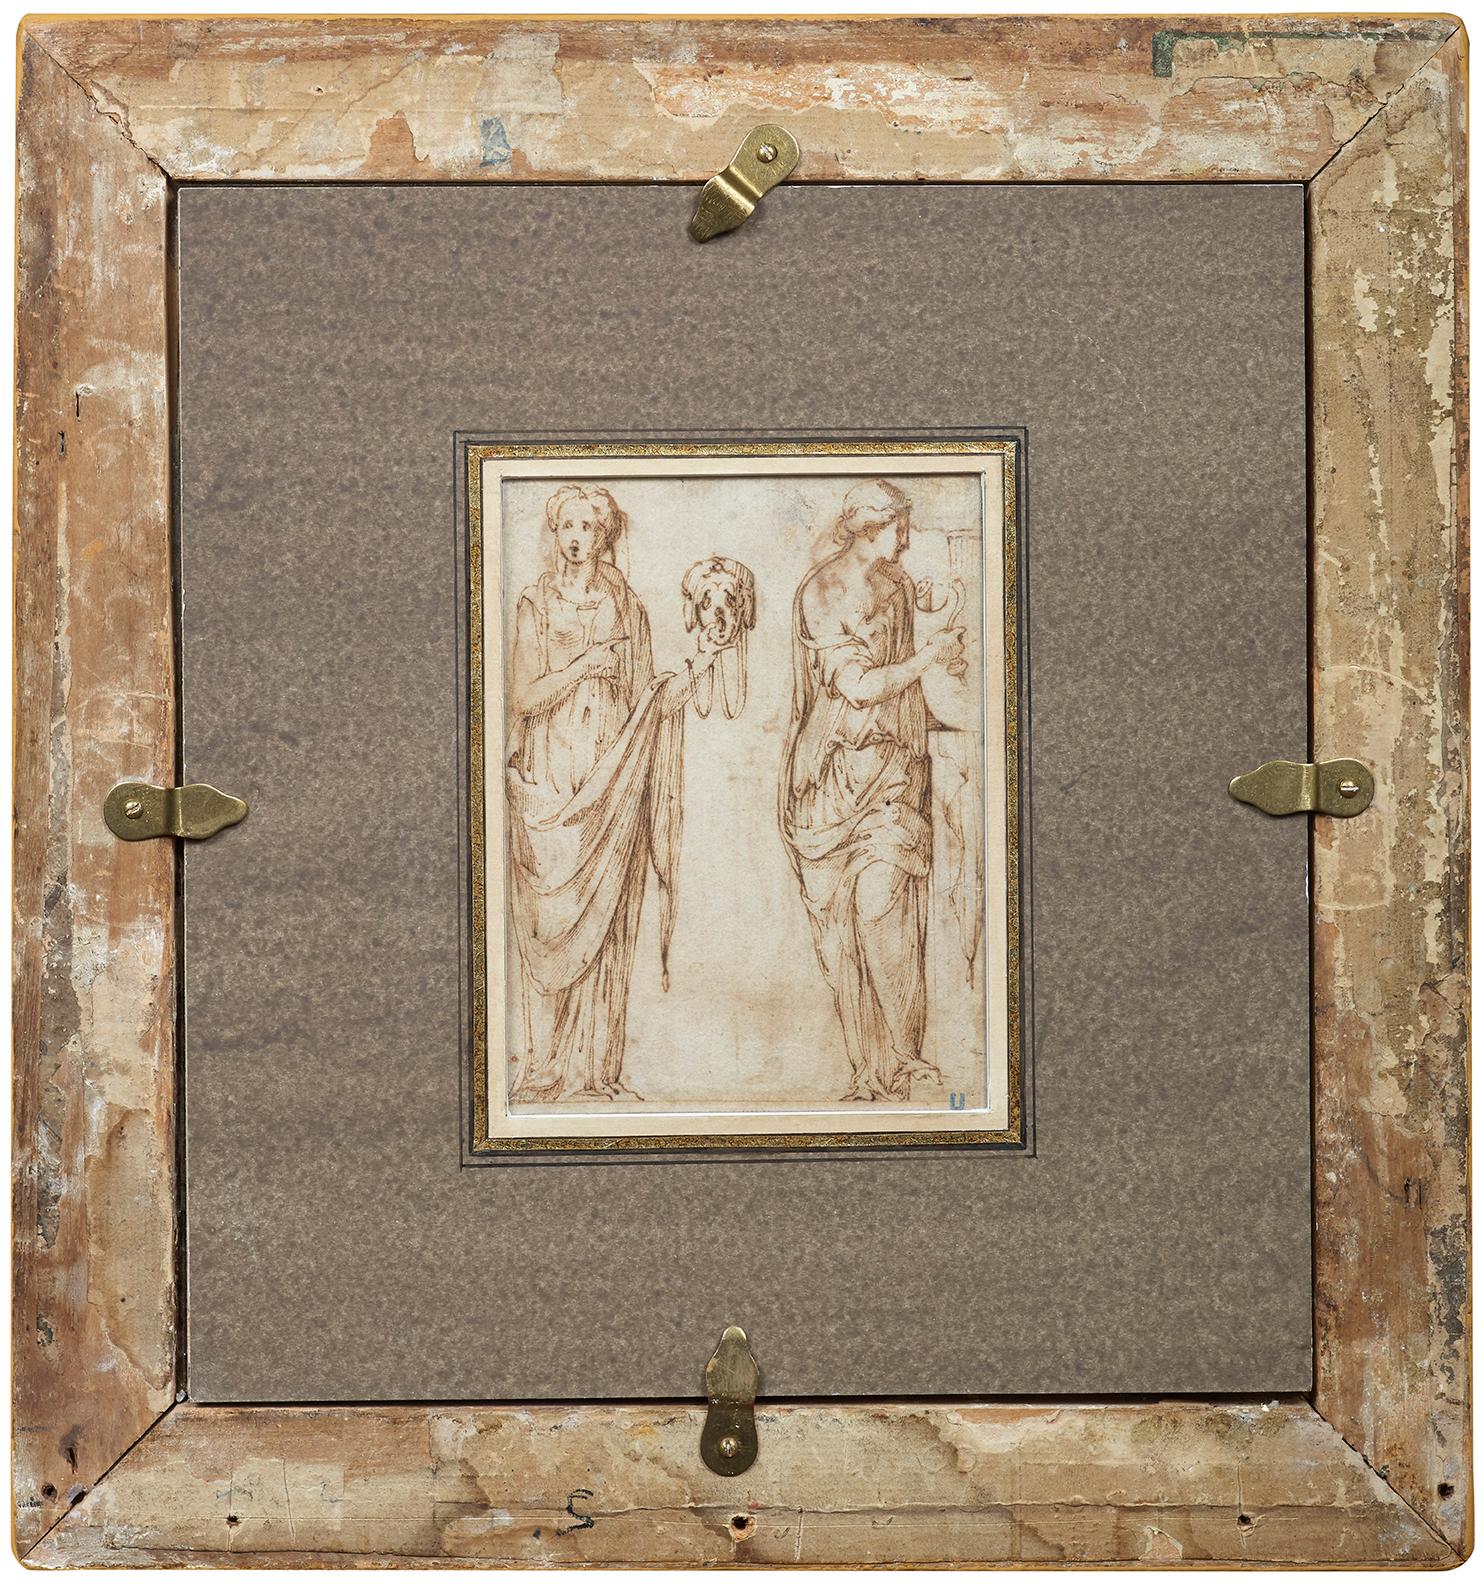 This subtle drawing from the Roman Renaissance presents Apollo accompanied by three Muses. It is based on a sarcophagus depicting the nine Muses framed by Minerva and Apollo, which is now in the Kunsthistorisches Museum in Vienna. Girolamo de Carpi